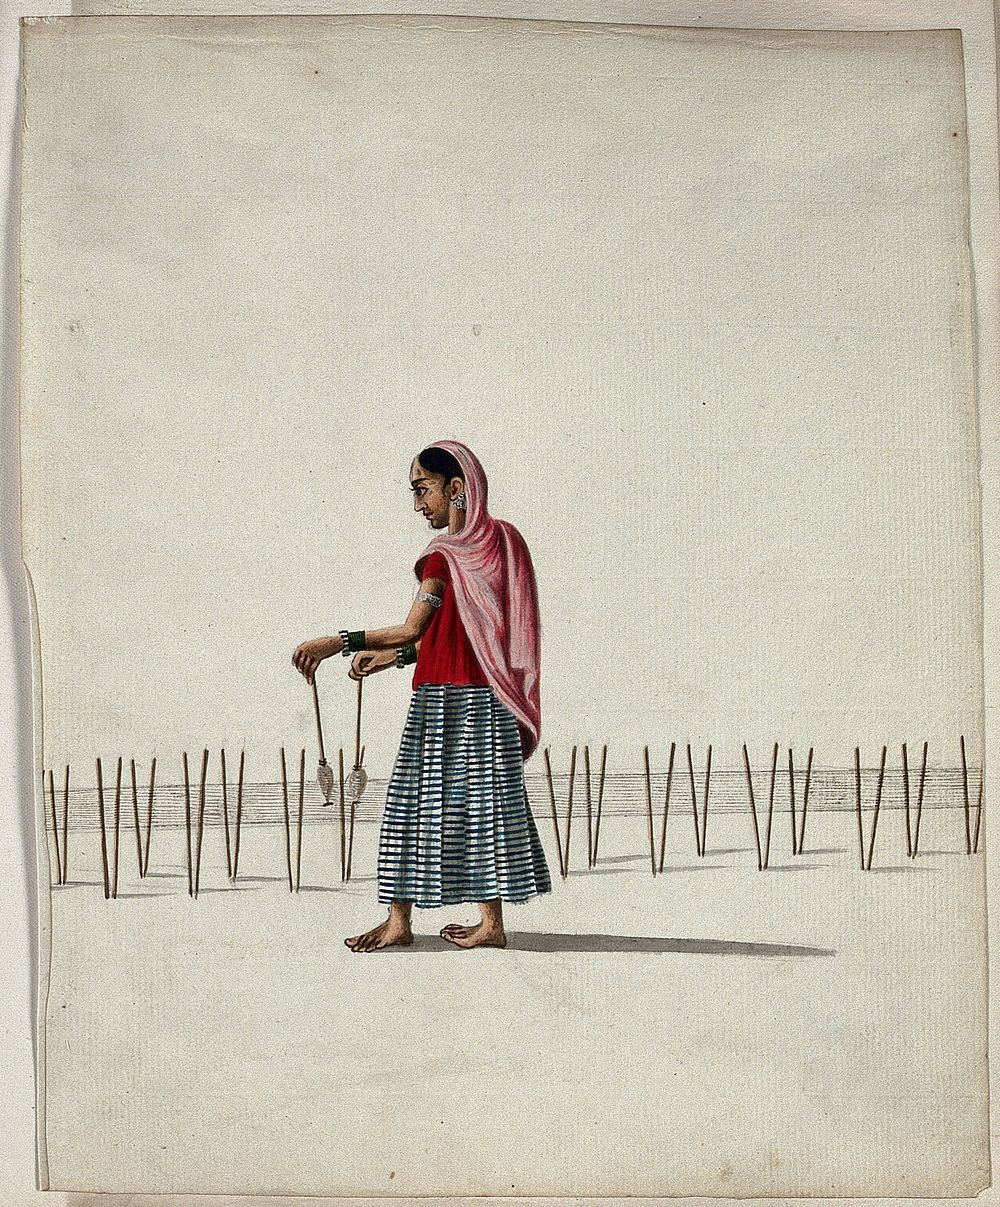 A woman winding thread onto spindles . Gouache painting by an Indian artist.